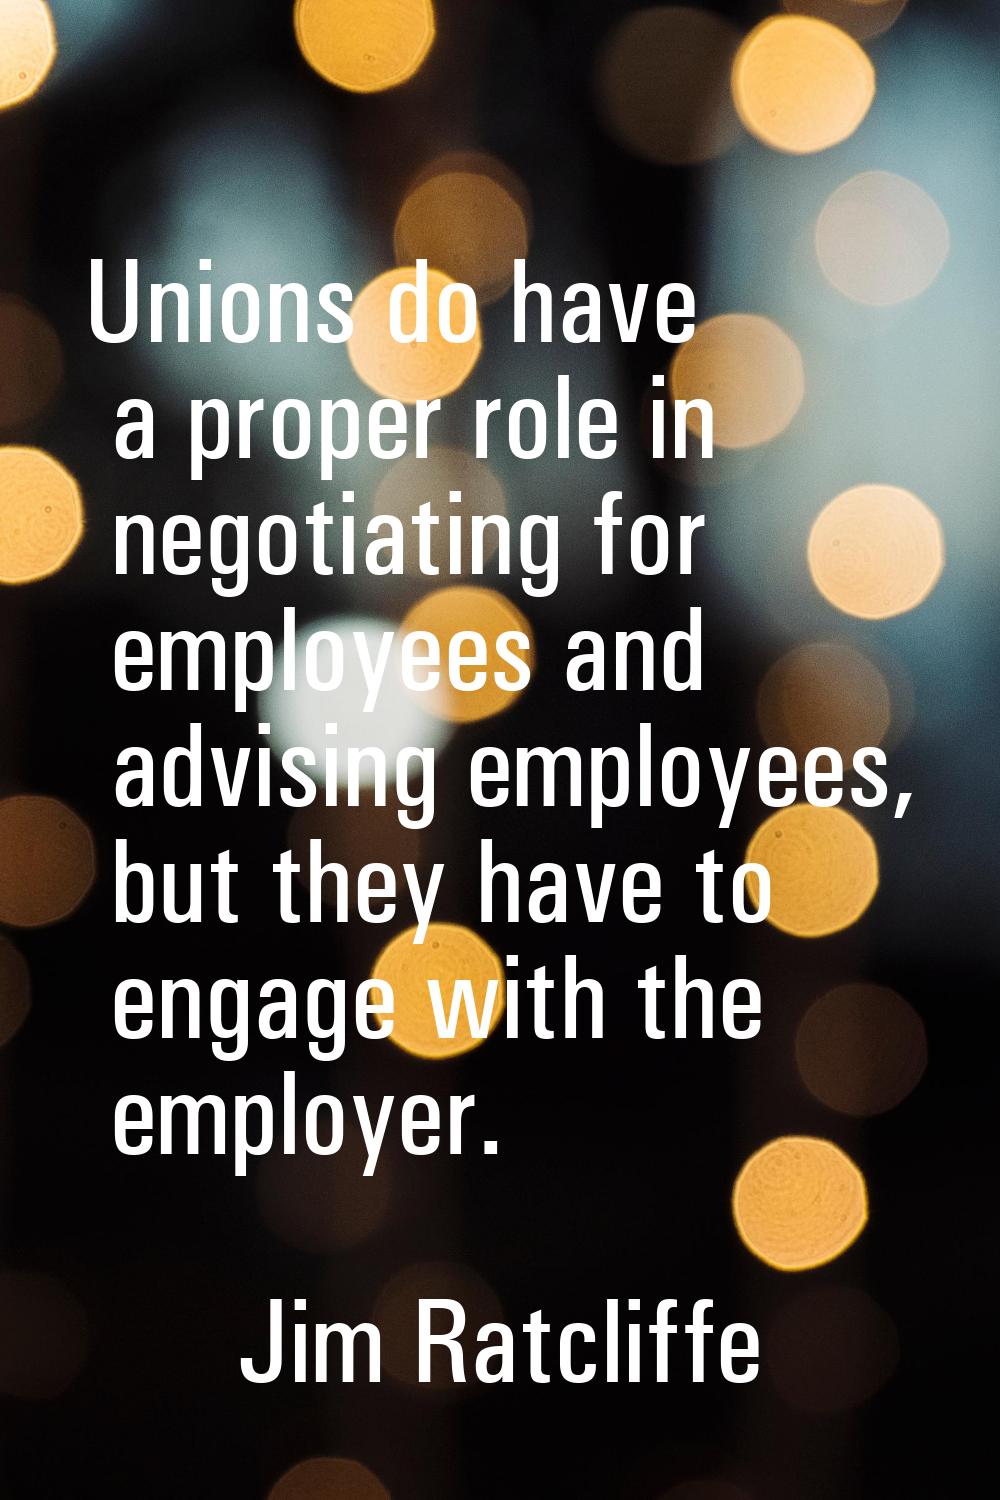 Unions do have a proper role in negotiating for employees and advising employees, but they have to 